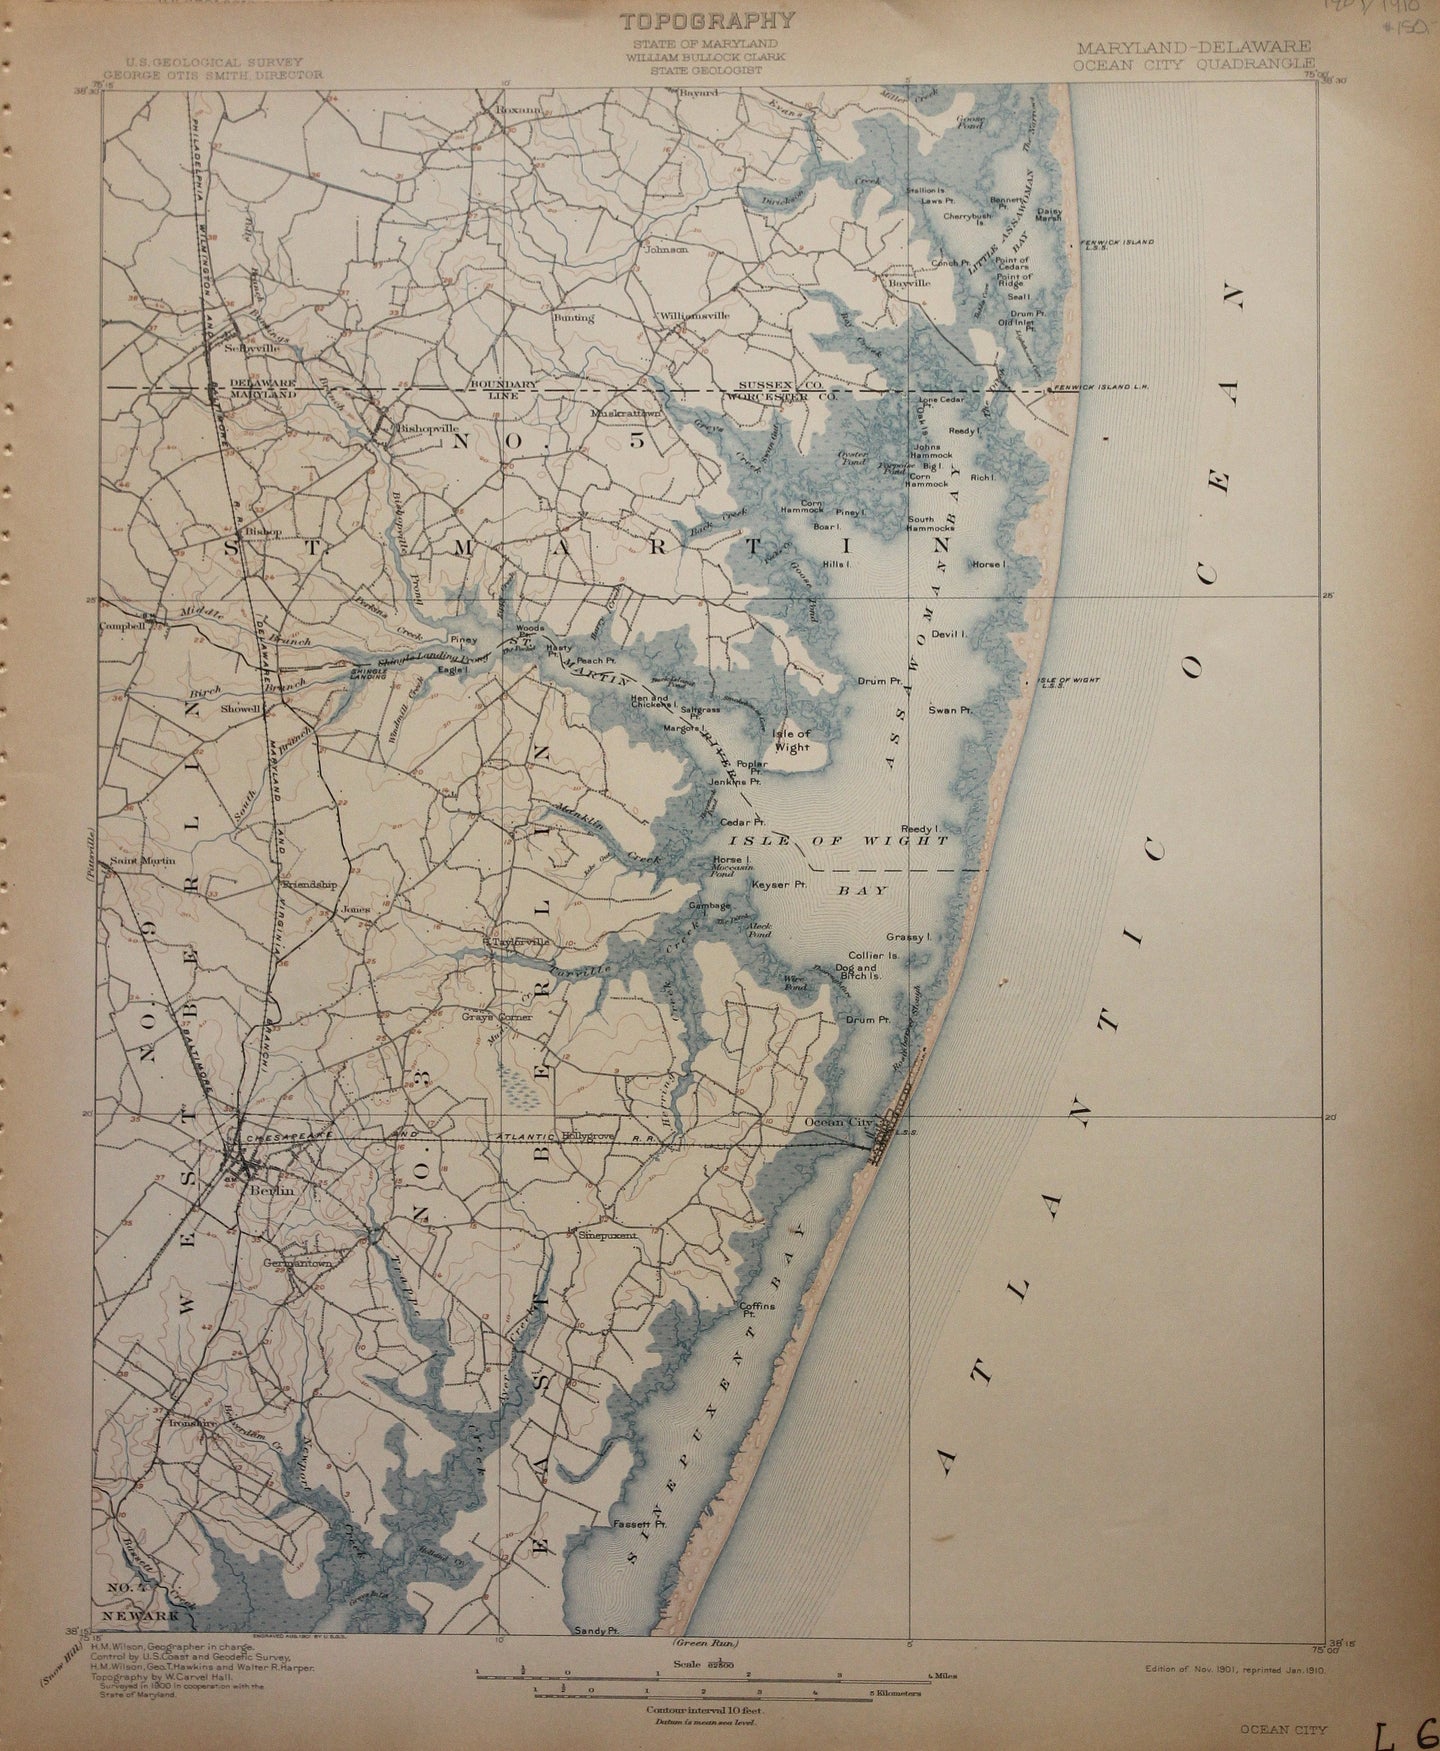 Genuine-Antique-Map-Ocean-City-Maryland-Delaware--1910-U-S-Geological-Survey--Maps-Of-Antiquity